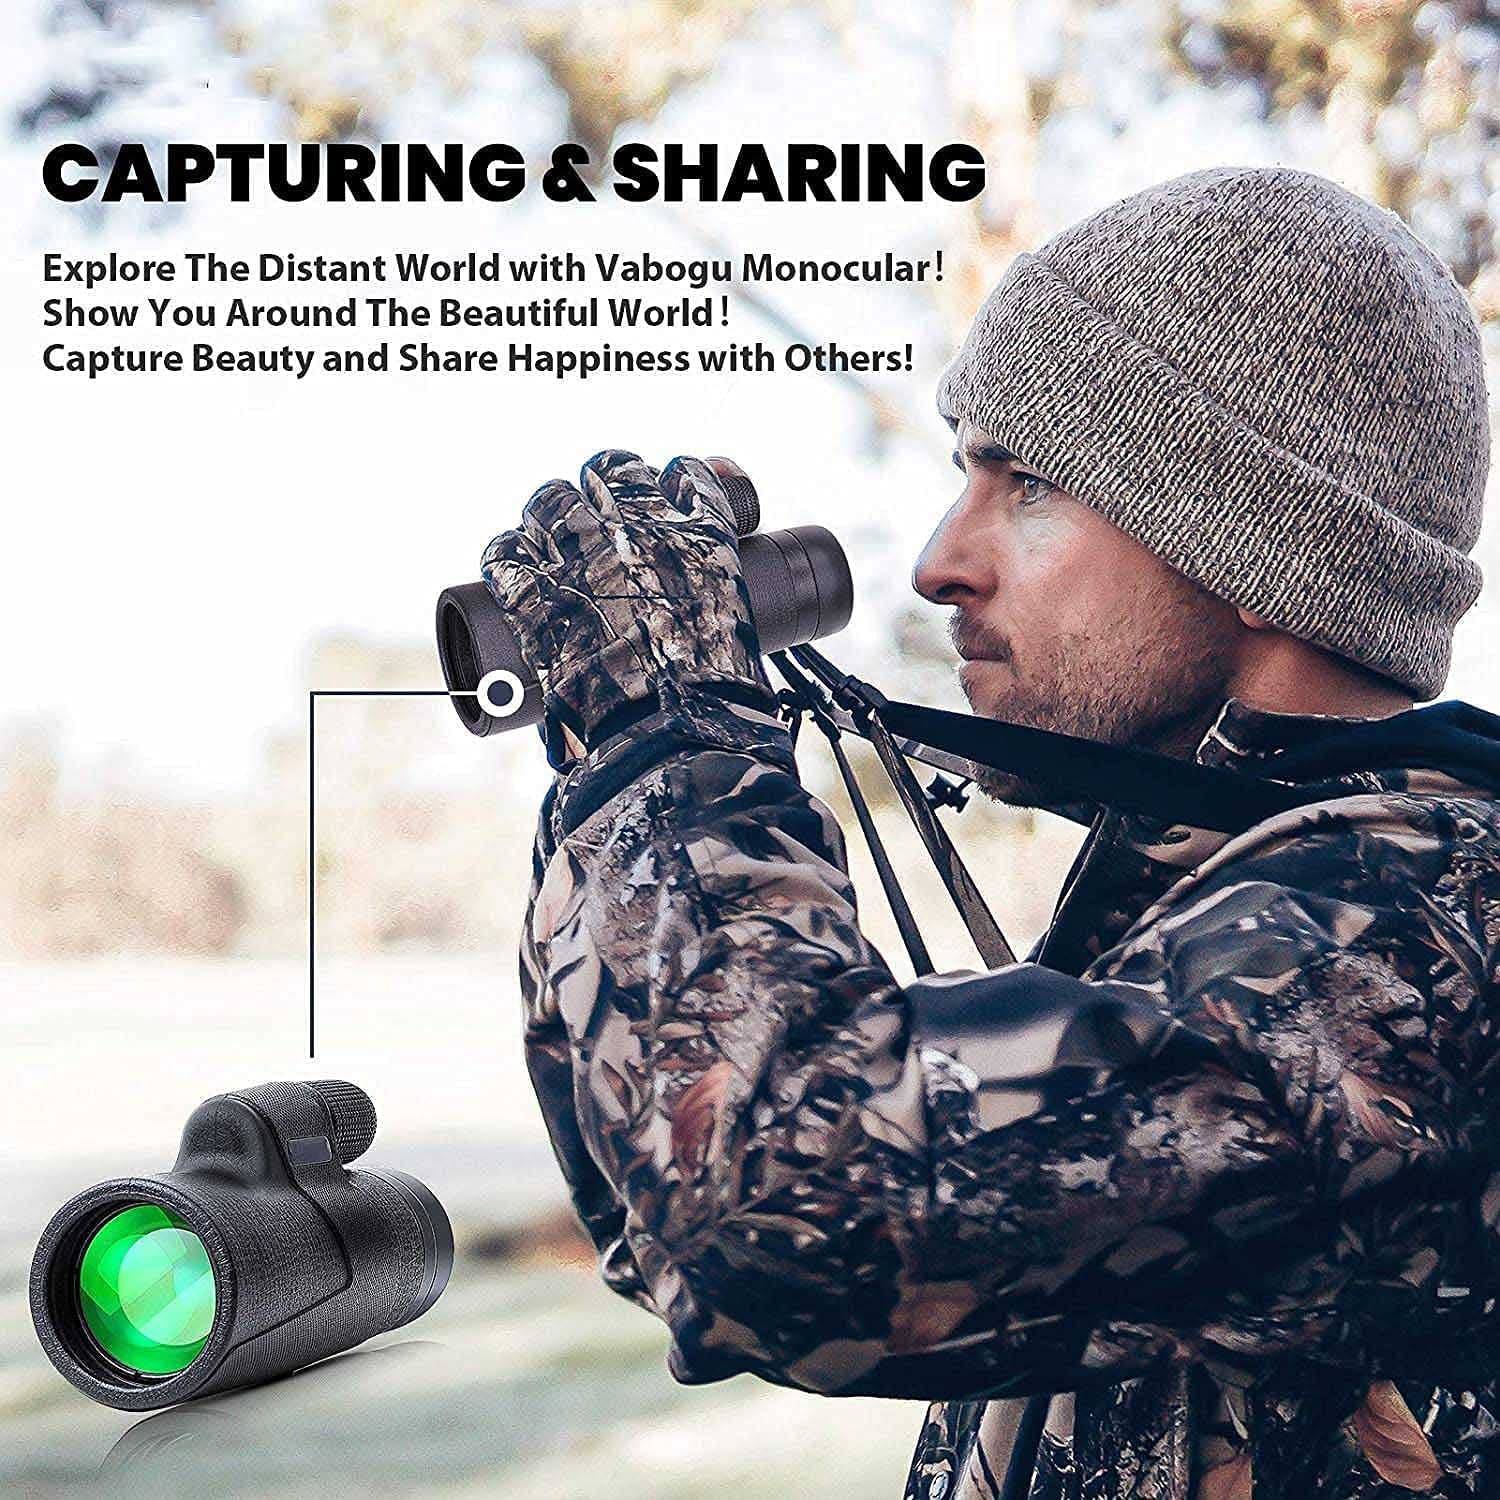 Monocular Telescope,12X50 High Power HD Monocular with Smartphone Holder Tripod Waterproof Night Vision and Clear Prism Dual Focus,Hunting Travelling Wildlife Bird Watching Gifts, Black